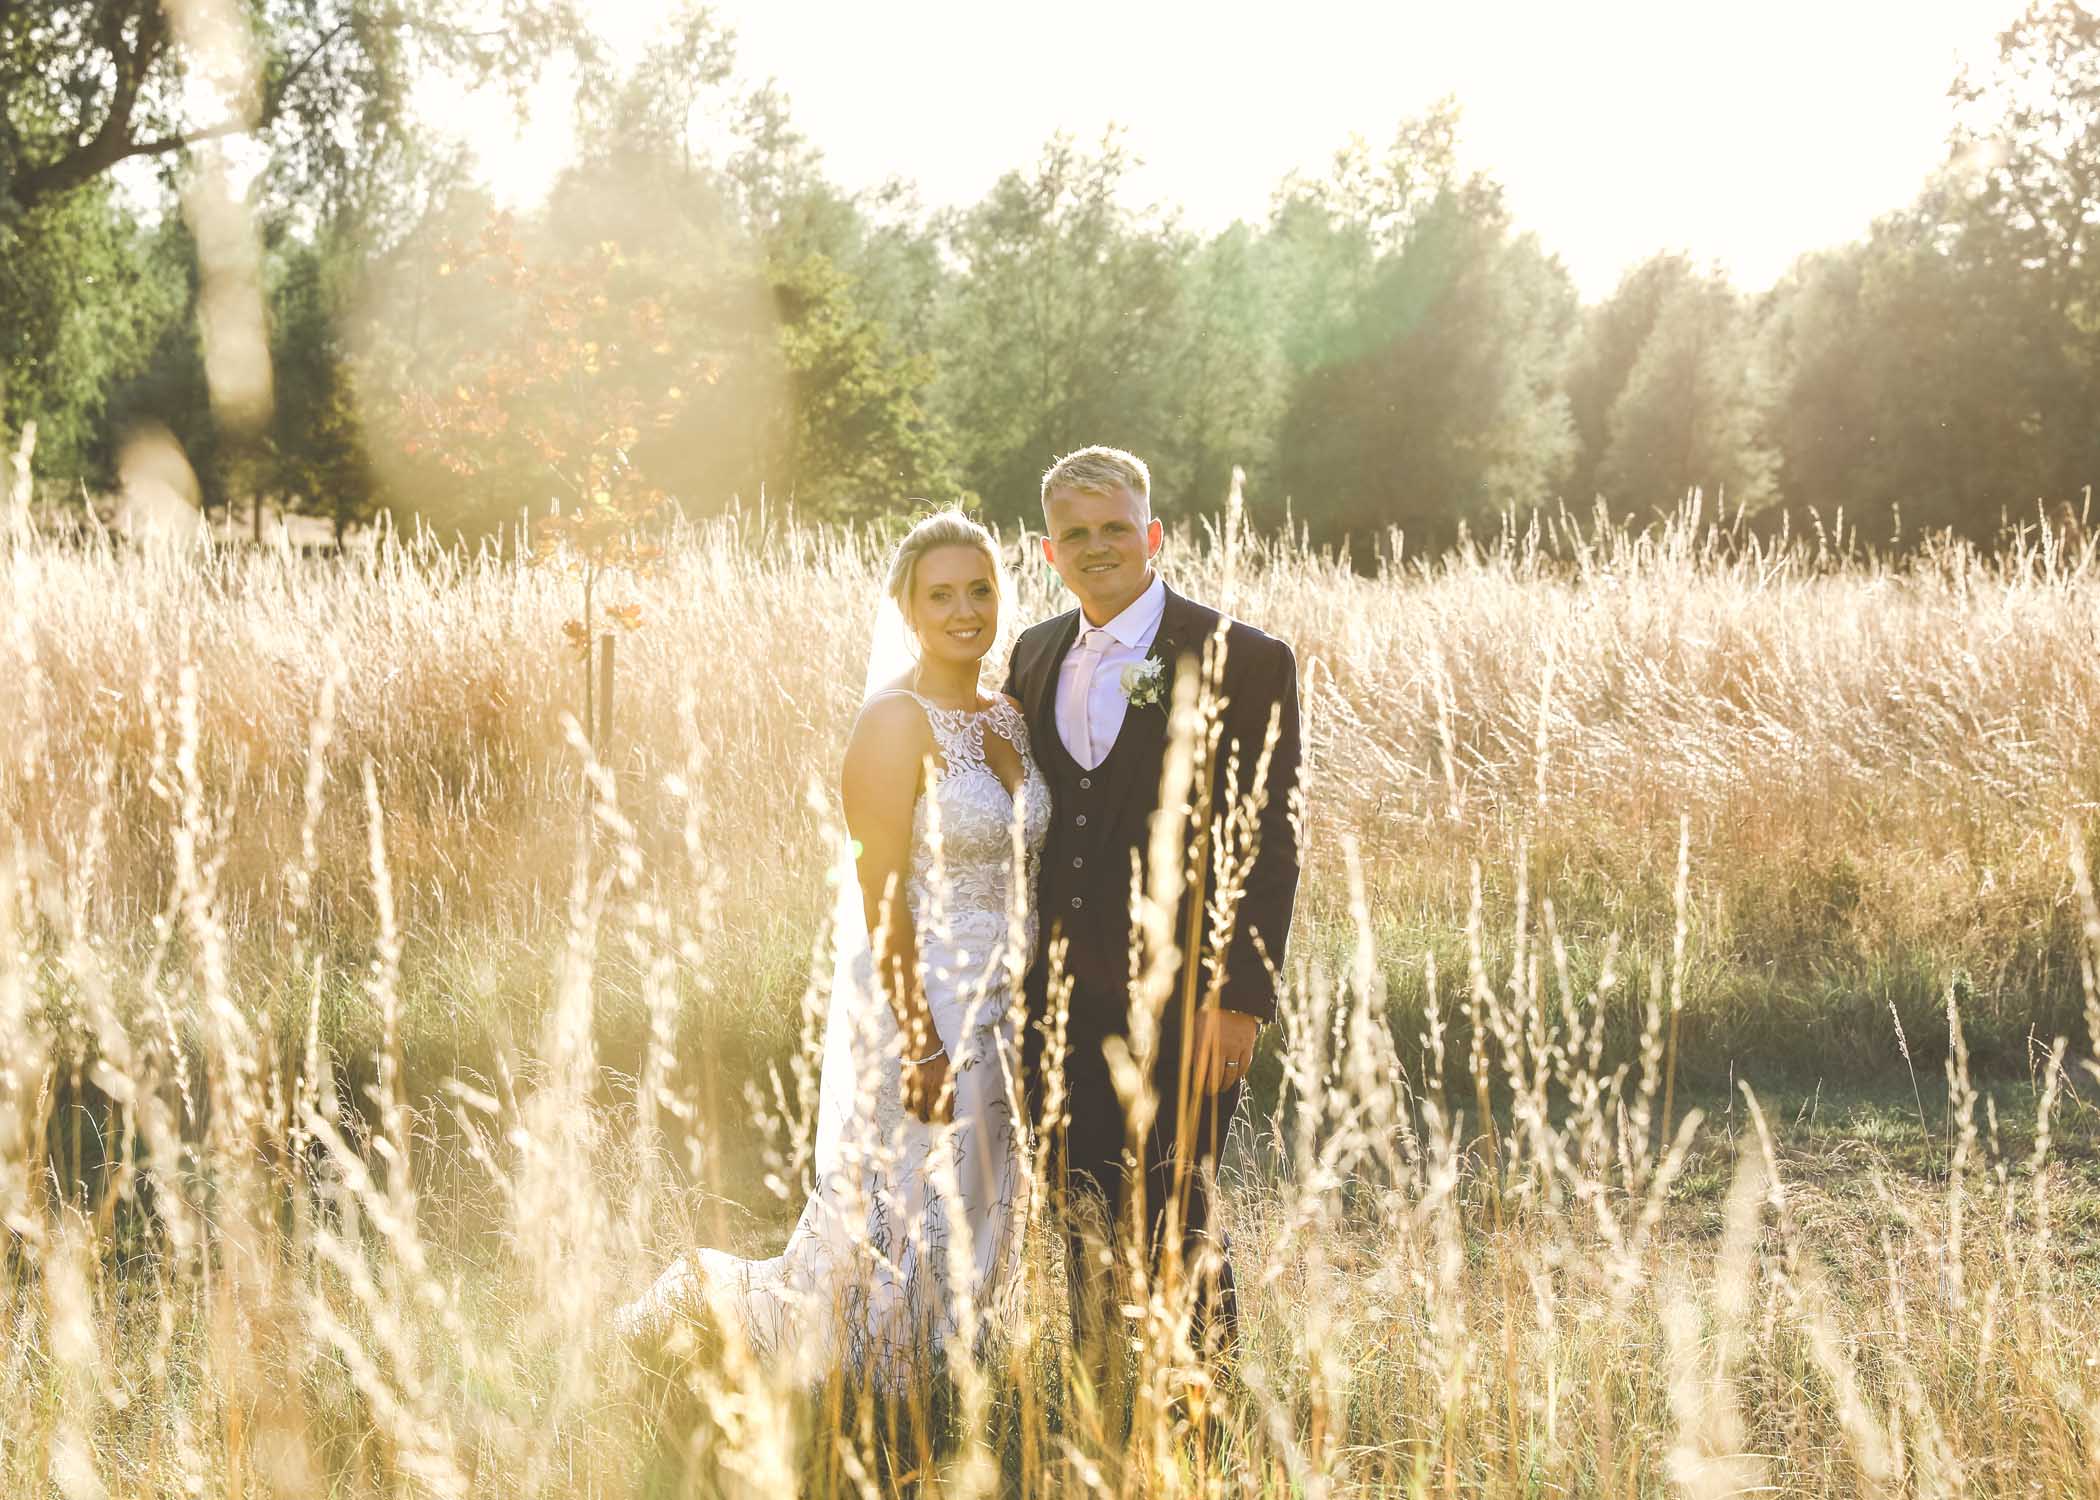 A bride and groom in the meadows at sunset at Easton Grange Wedding Venue on their wedding day captured by Suffolk Wedding Photographers Hayley Denston Photography